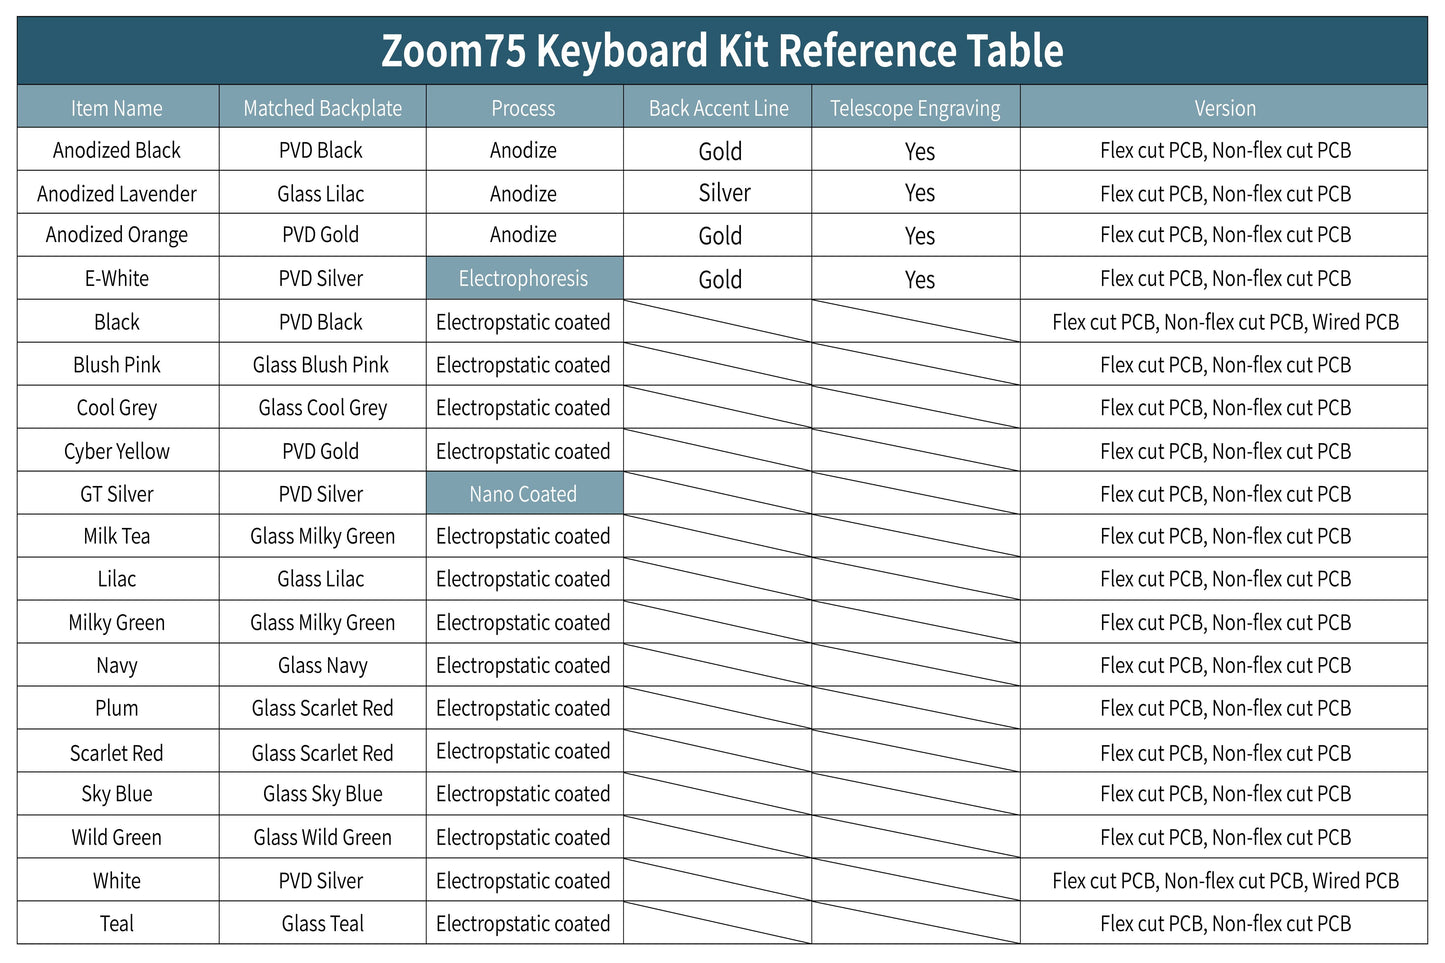 [Group-Buy] Meletrix Zoom75 Essential Edition (EE) - Barebones Keyboard Kit - White [Air Shipping]